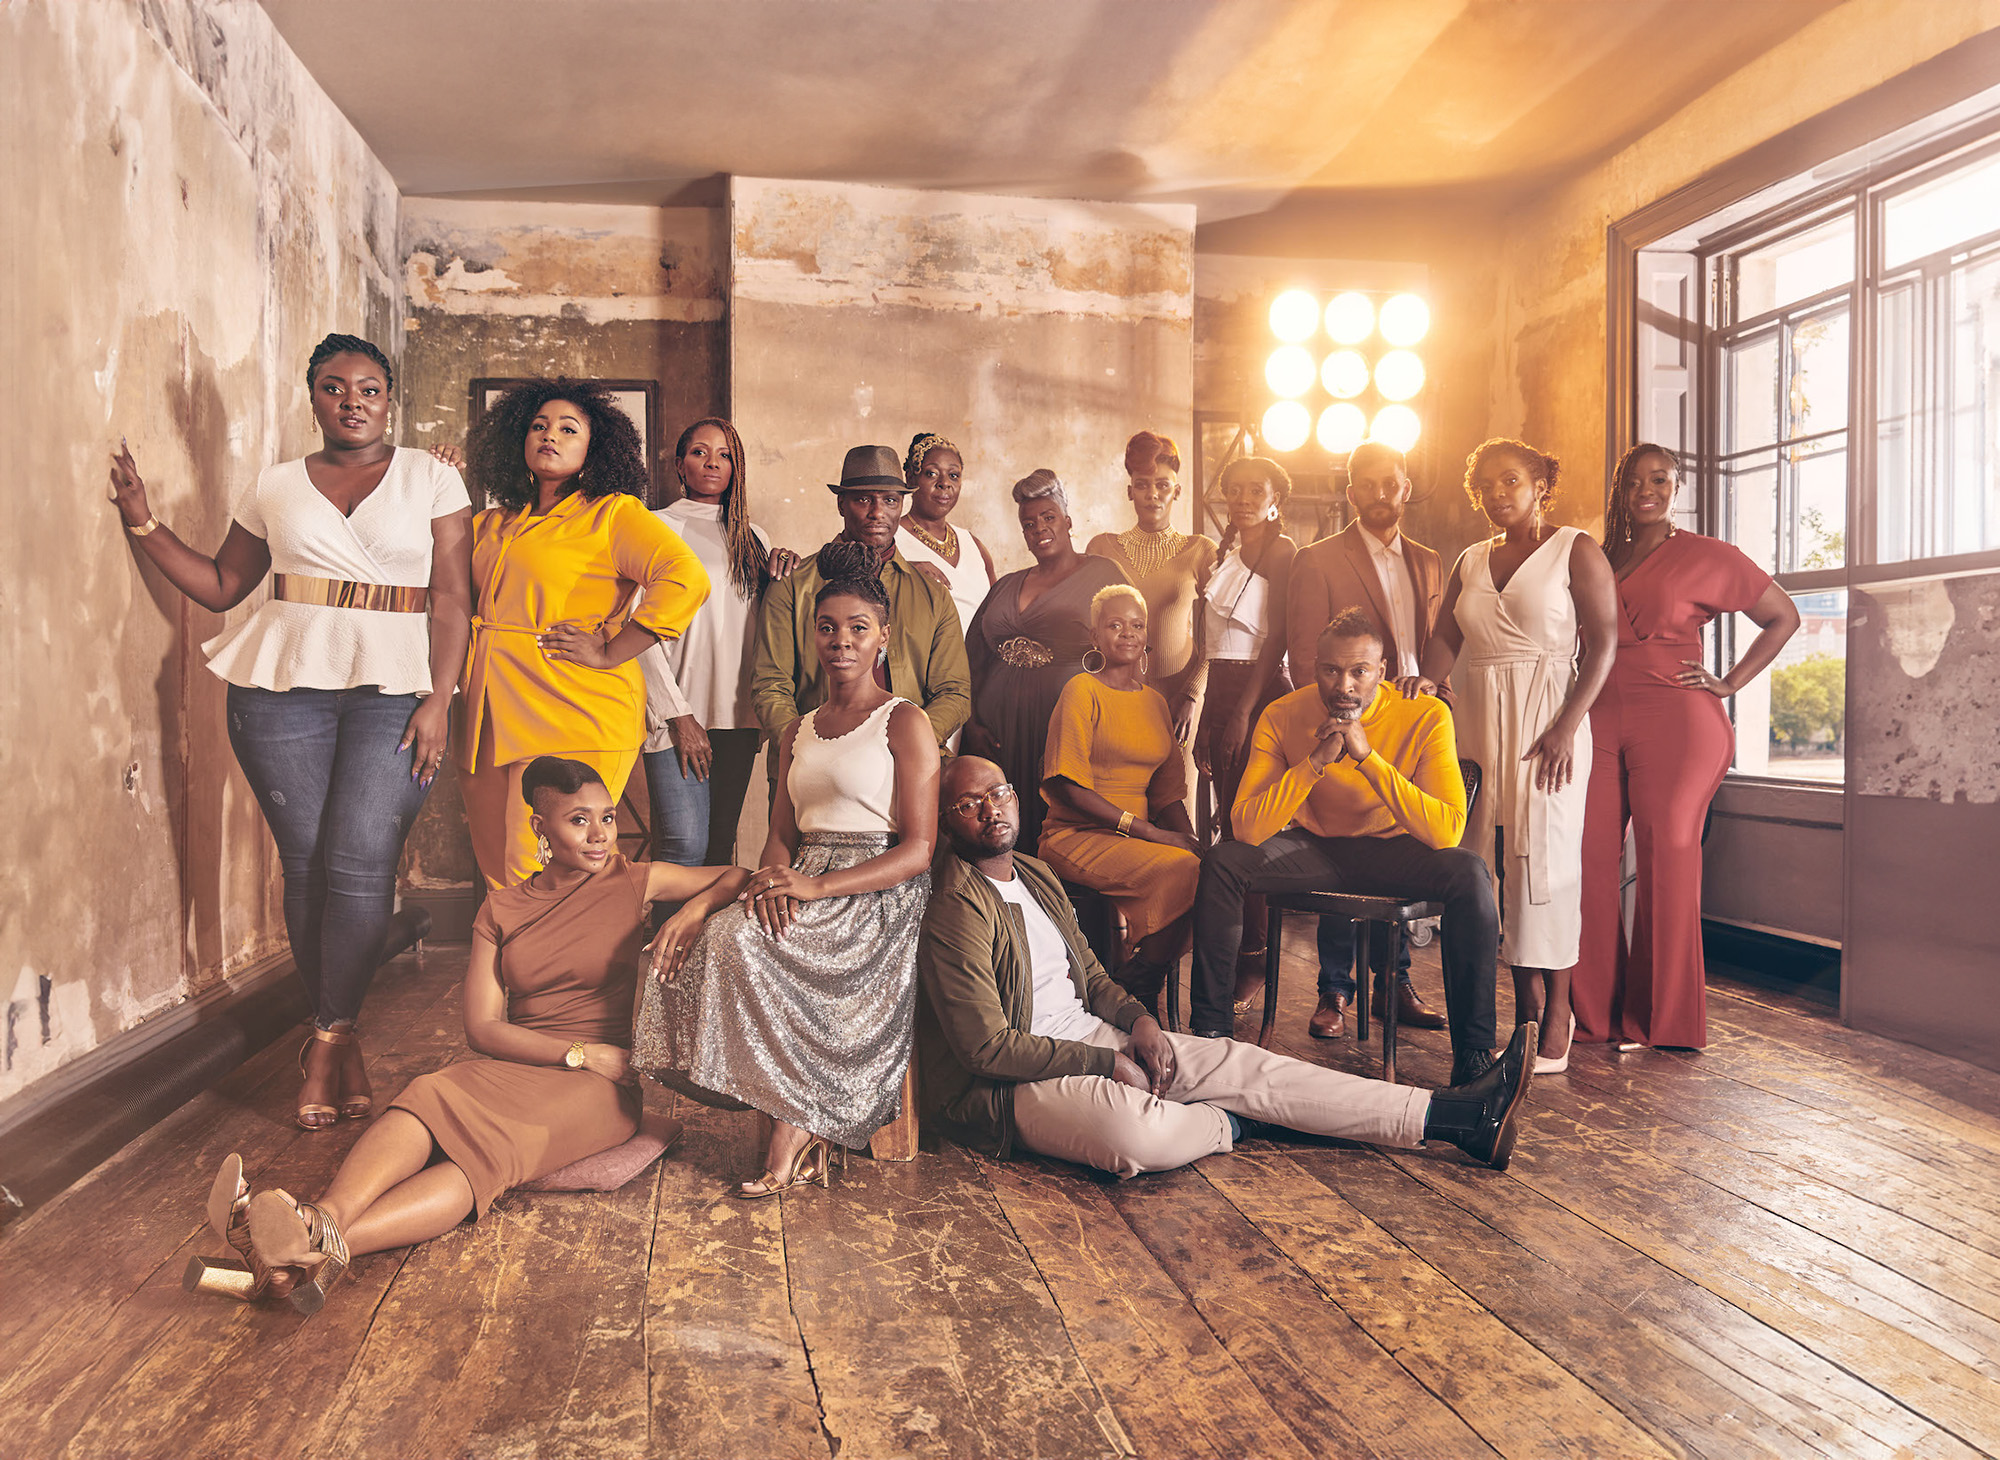 Kingdom Choir, a group of sixteen diverse individuals, dressed in stylish, elegant outfits in shades of white, yellow, and earth tones, pose together in a rustic room.